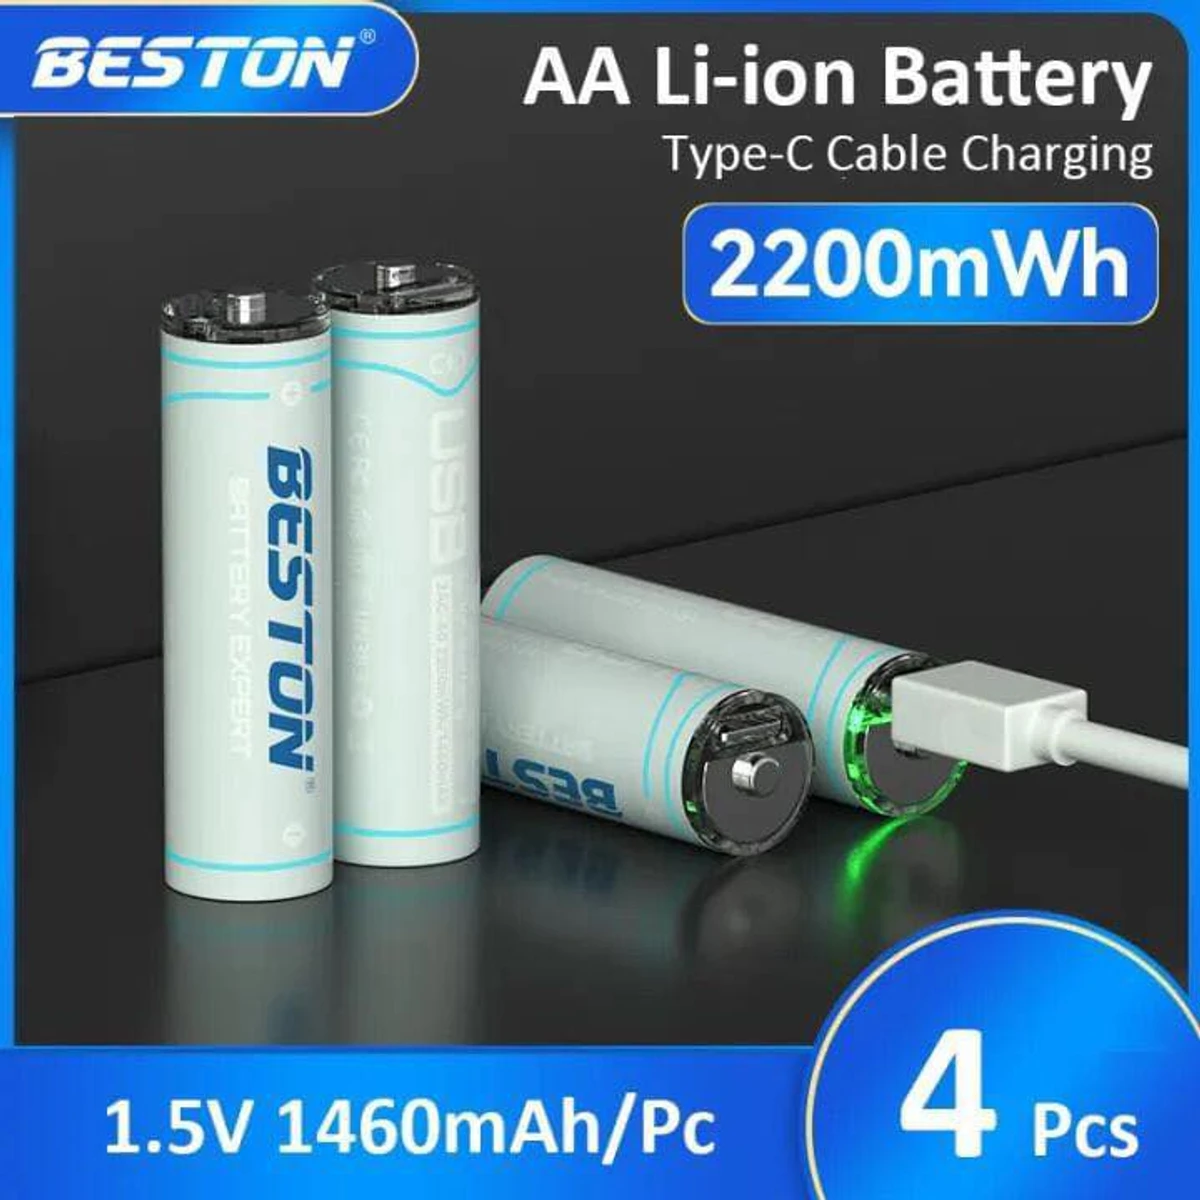 BESTON Hot sell Type-C AA 1.5V Lithium ion Rechargeable Battery 2200mWh